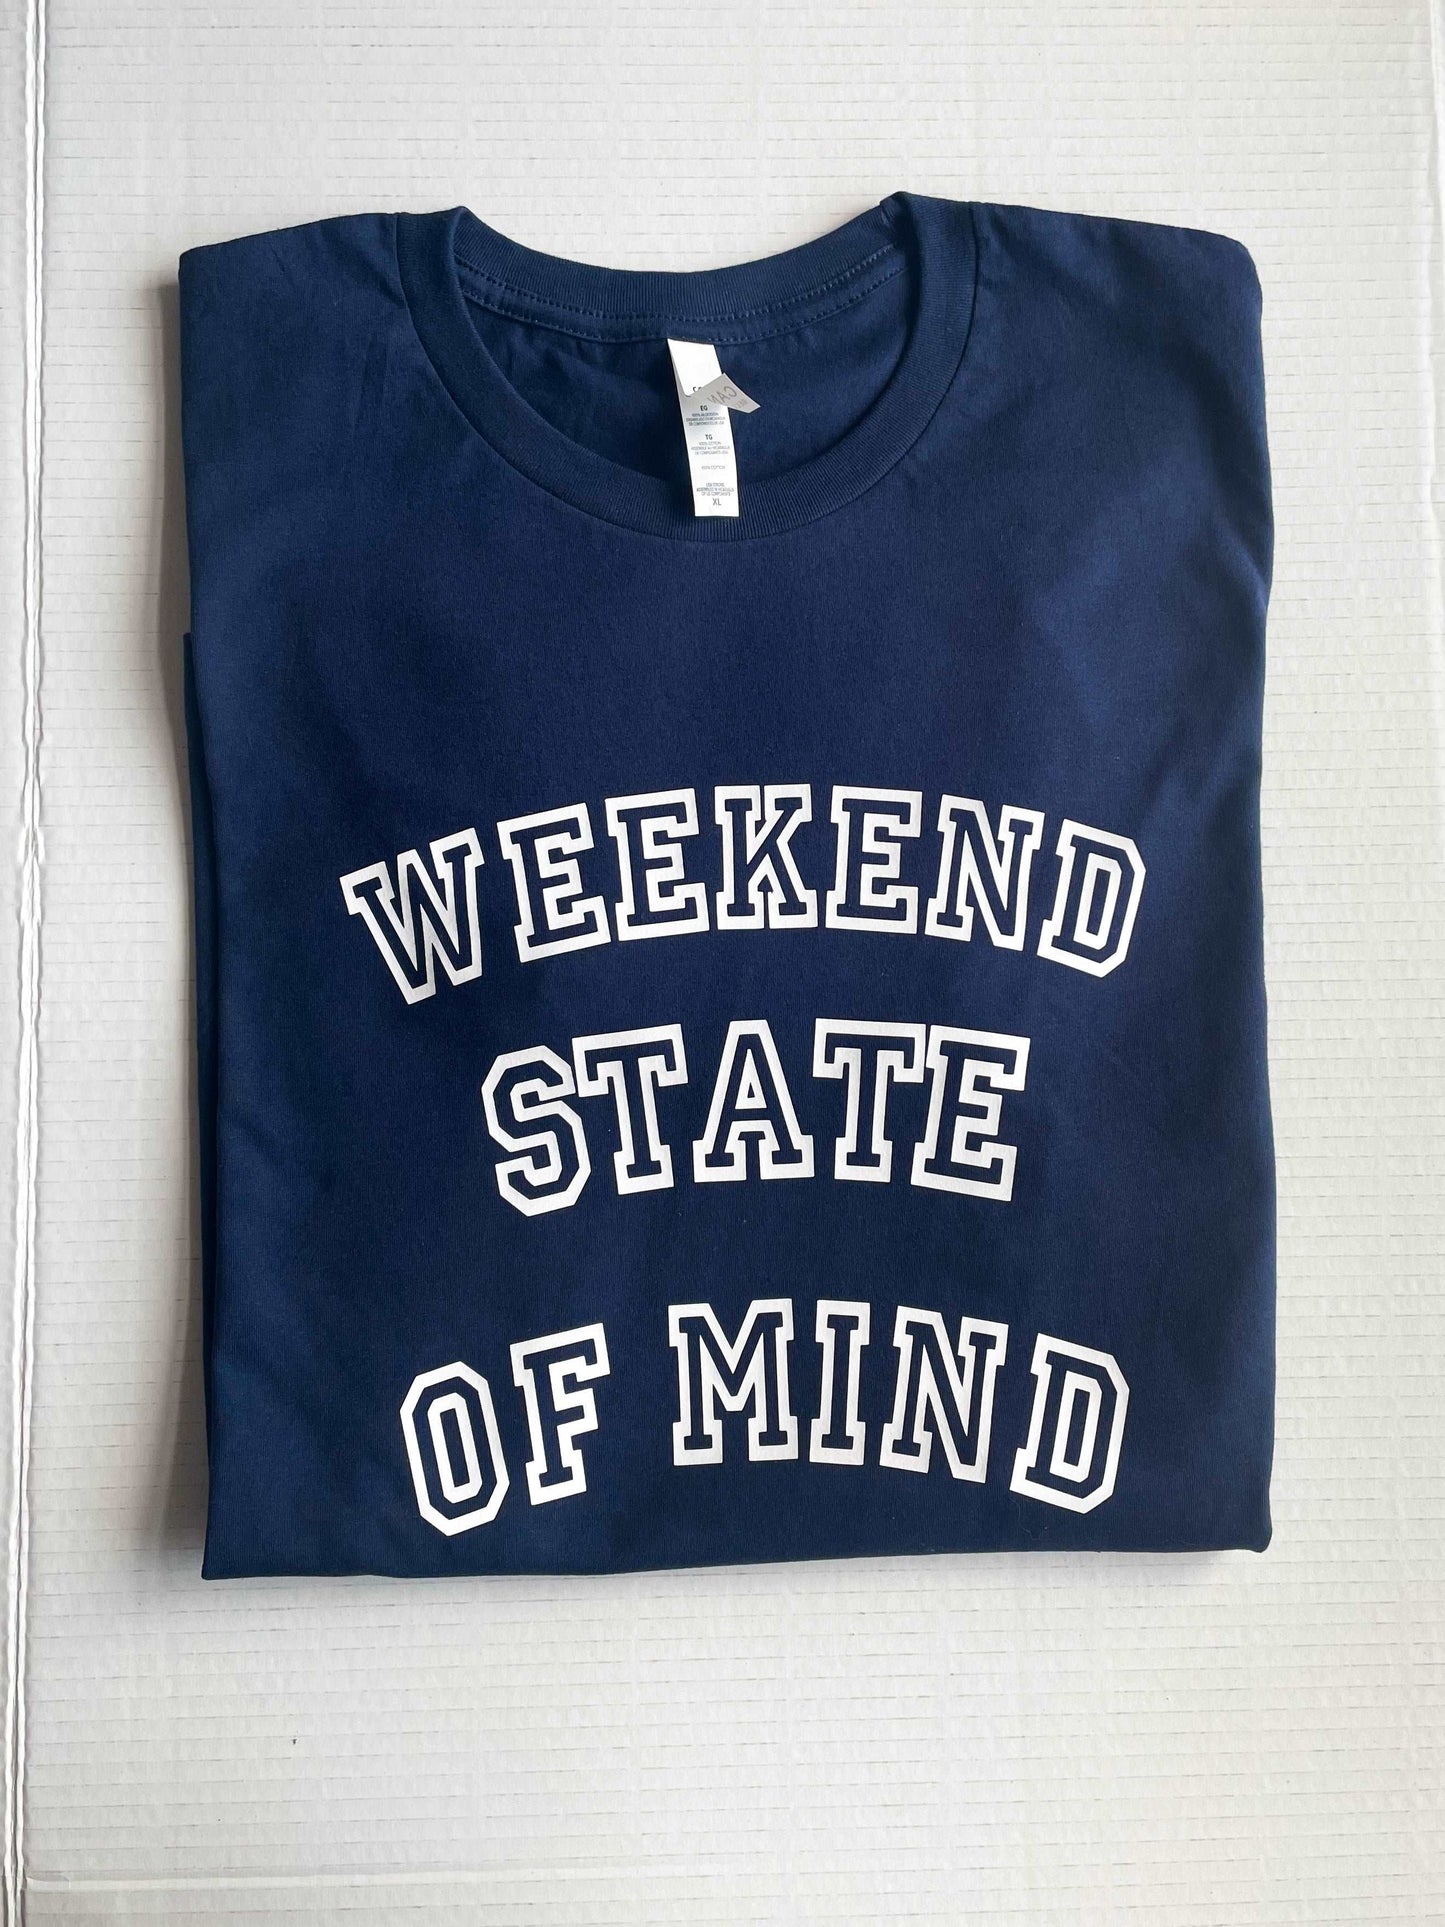 Weekend state of mind | T- shirt